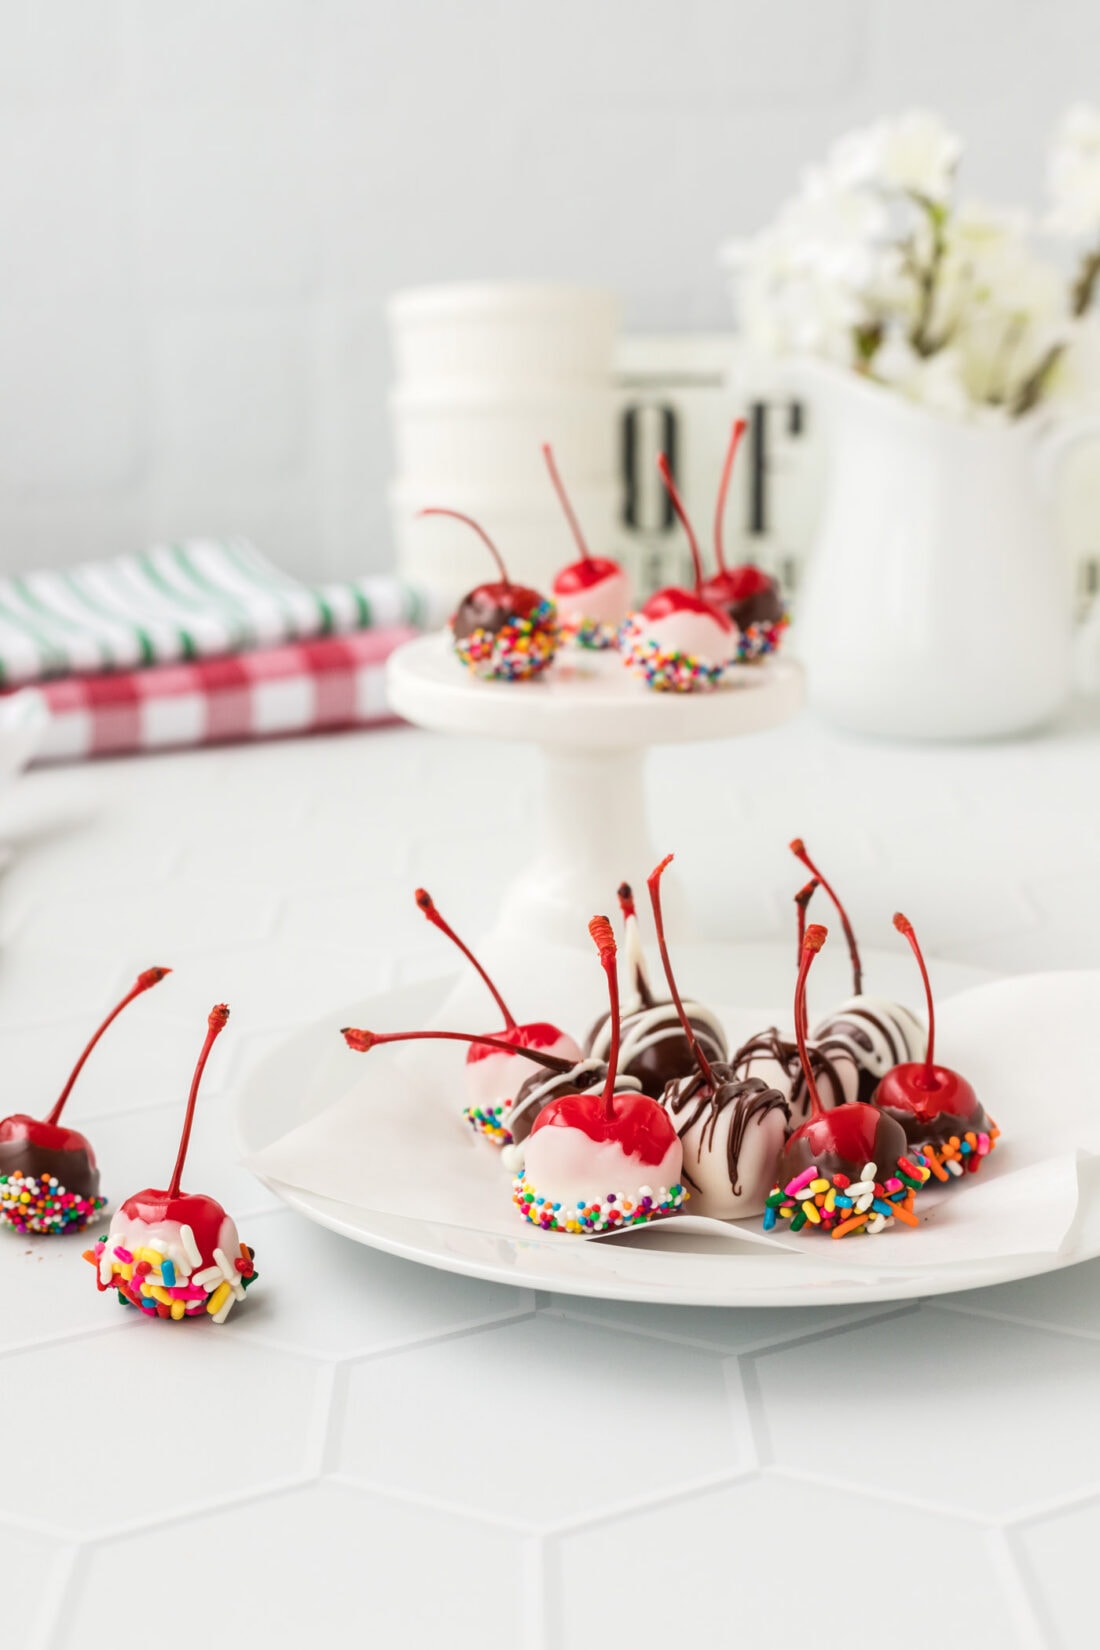 Spiked Cherries on a plate with flowes in background